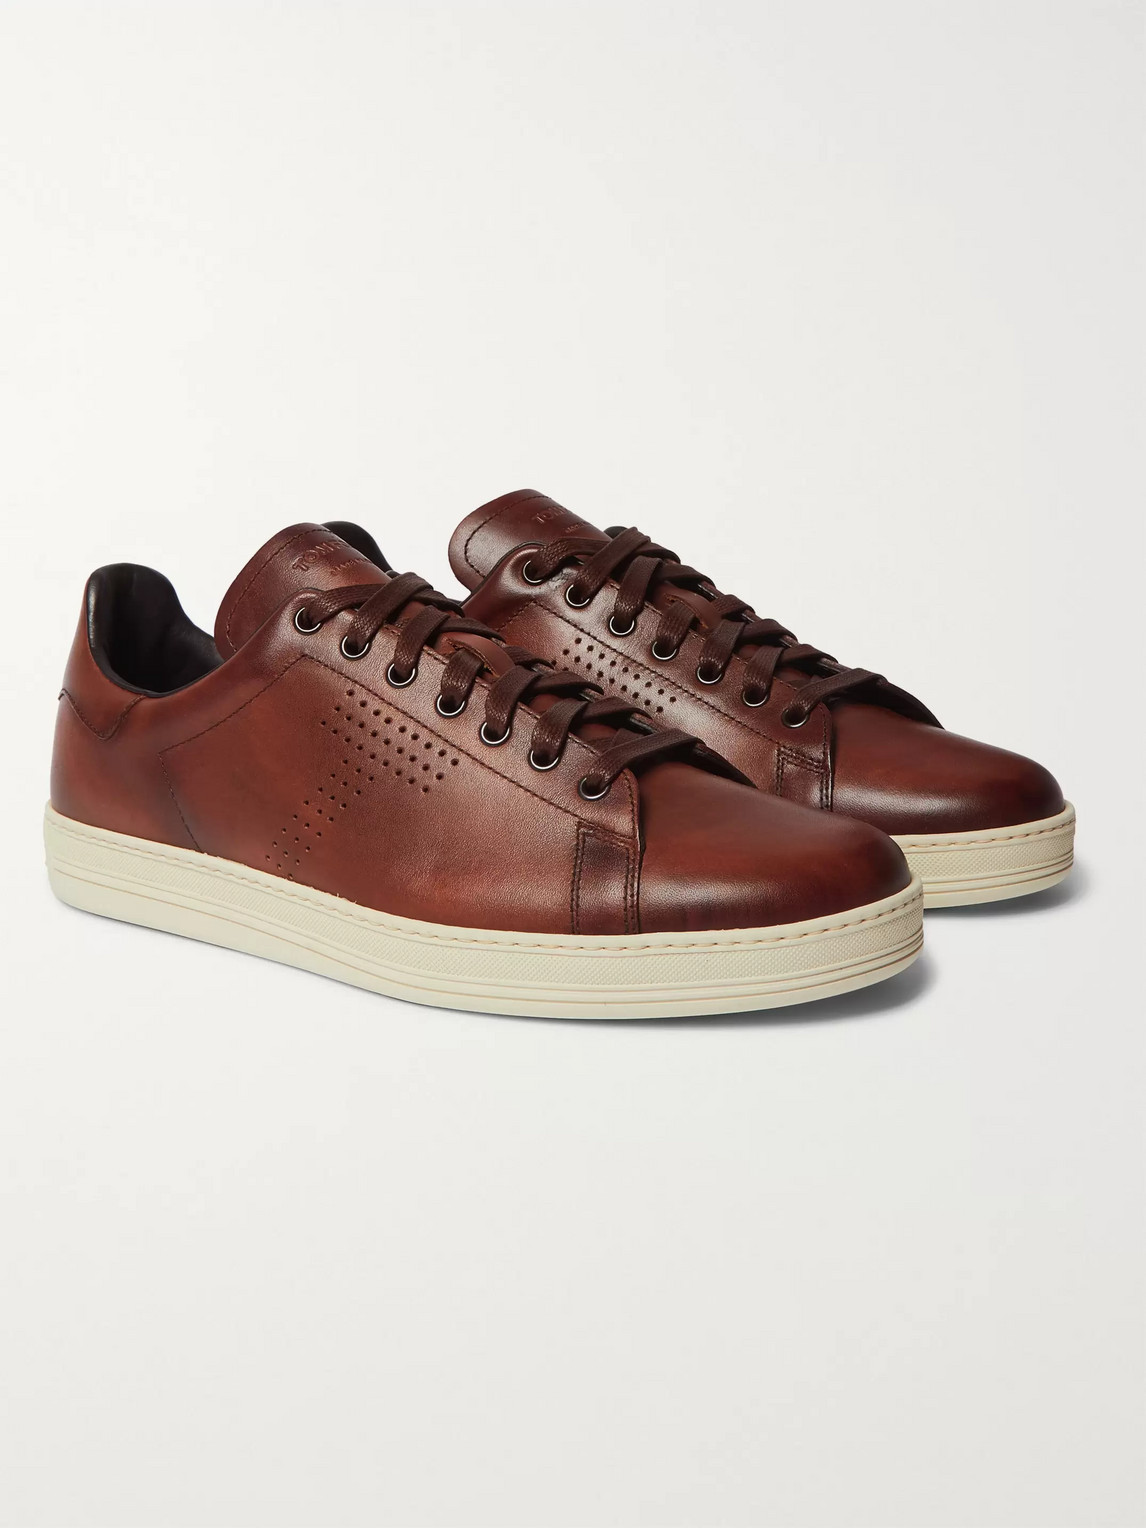 TOM FORD WARWICK PERFORATED LEATHER SNEAKERS